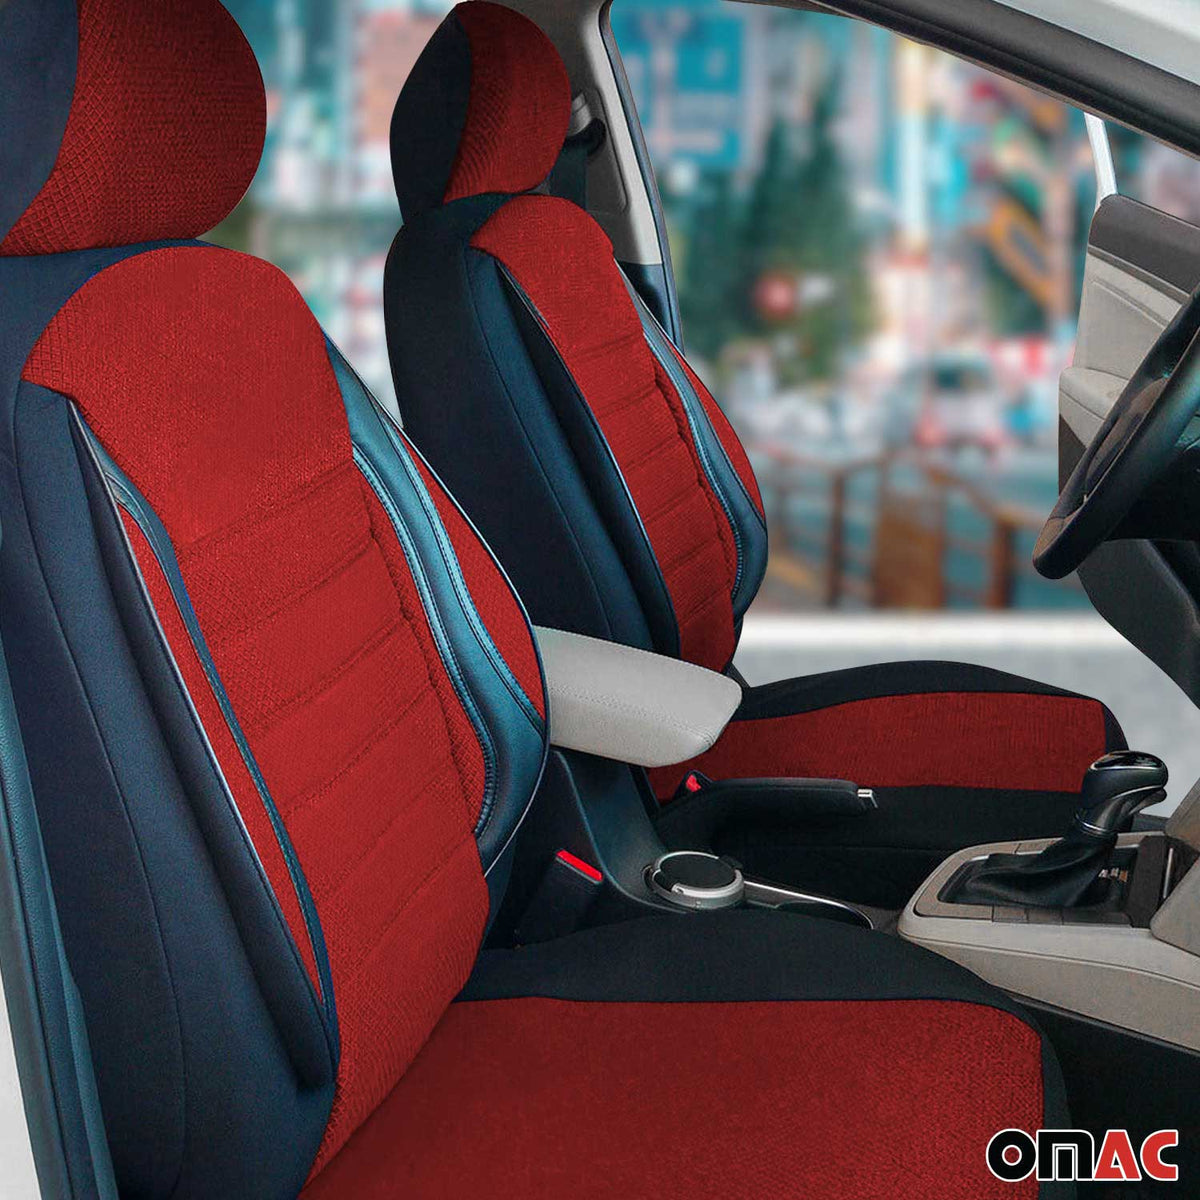 Protective covers seat covers for Renault Laguna Modus black red 2 seat front set